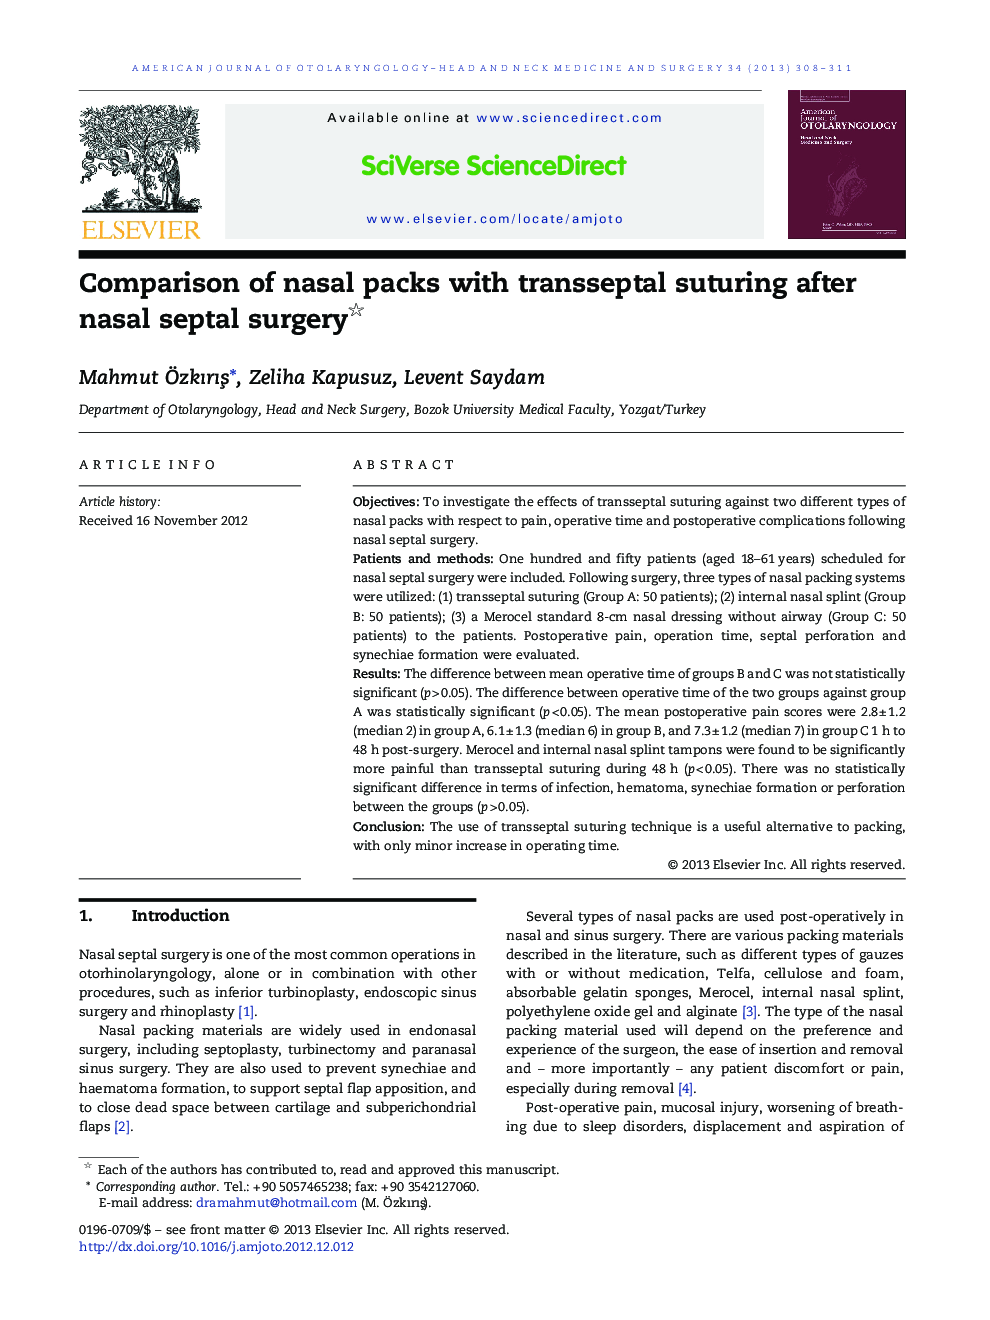 Comparison of nasal packs with transseptal suturing after nasal septal surgery ★